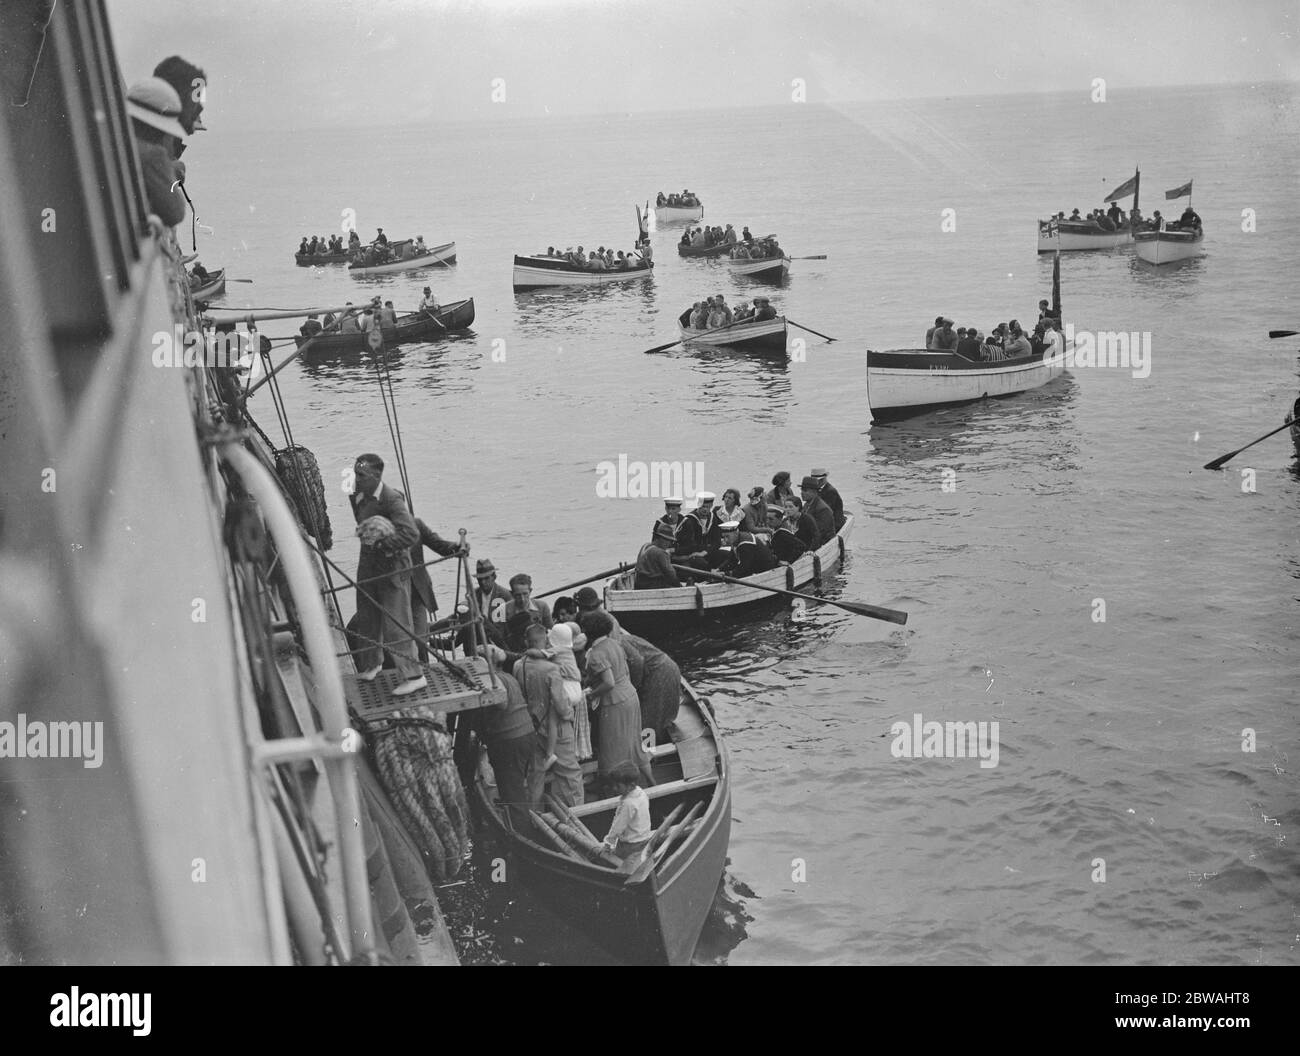 no further information available Row boats bring passengers to an ocean liner moored at sea. c.1920 Stock Photo